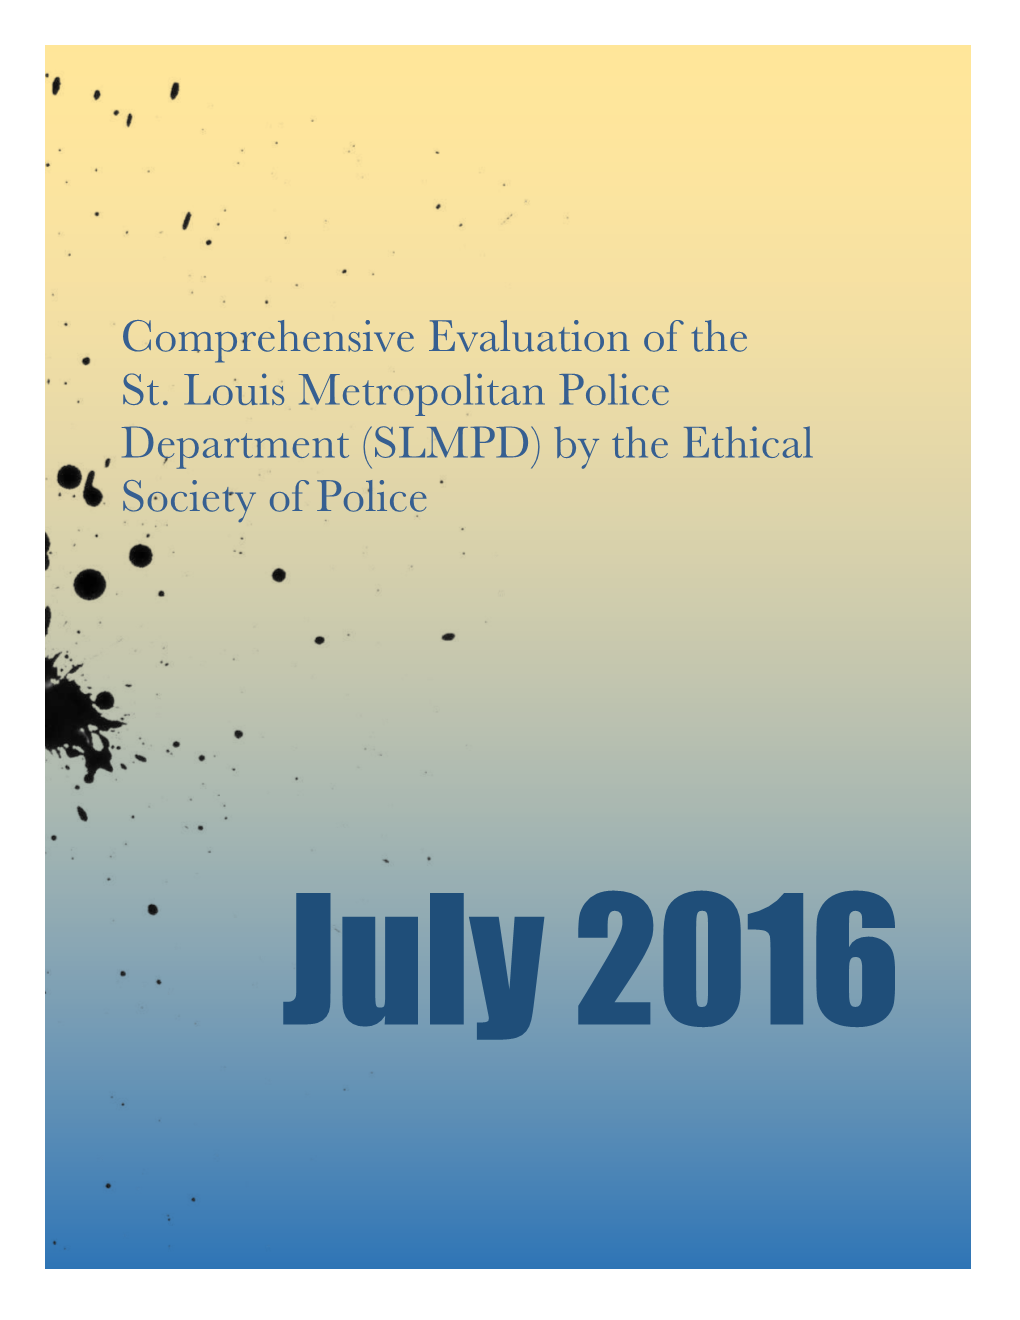 Comprehensive Evaluation of the St. Louis Metropolitan Police Department (SLMPD) by the Ethical